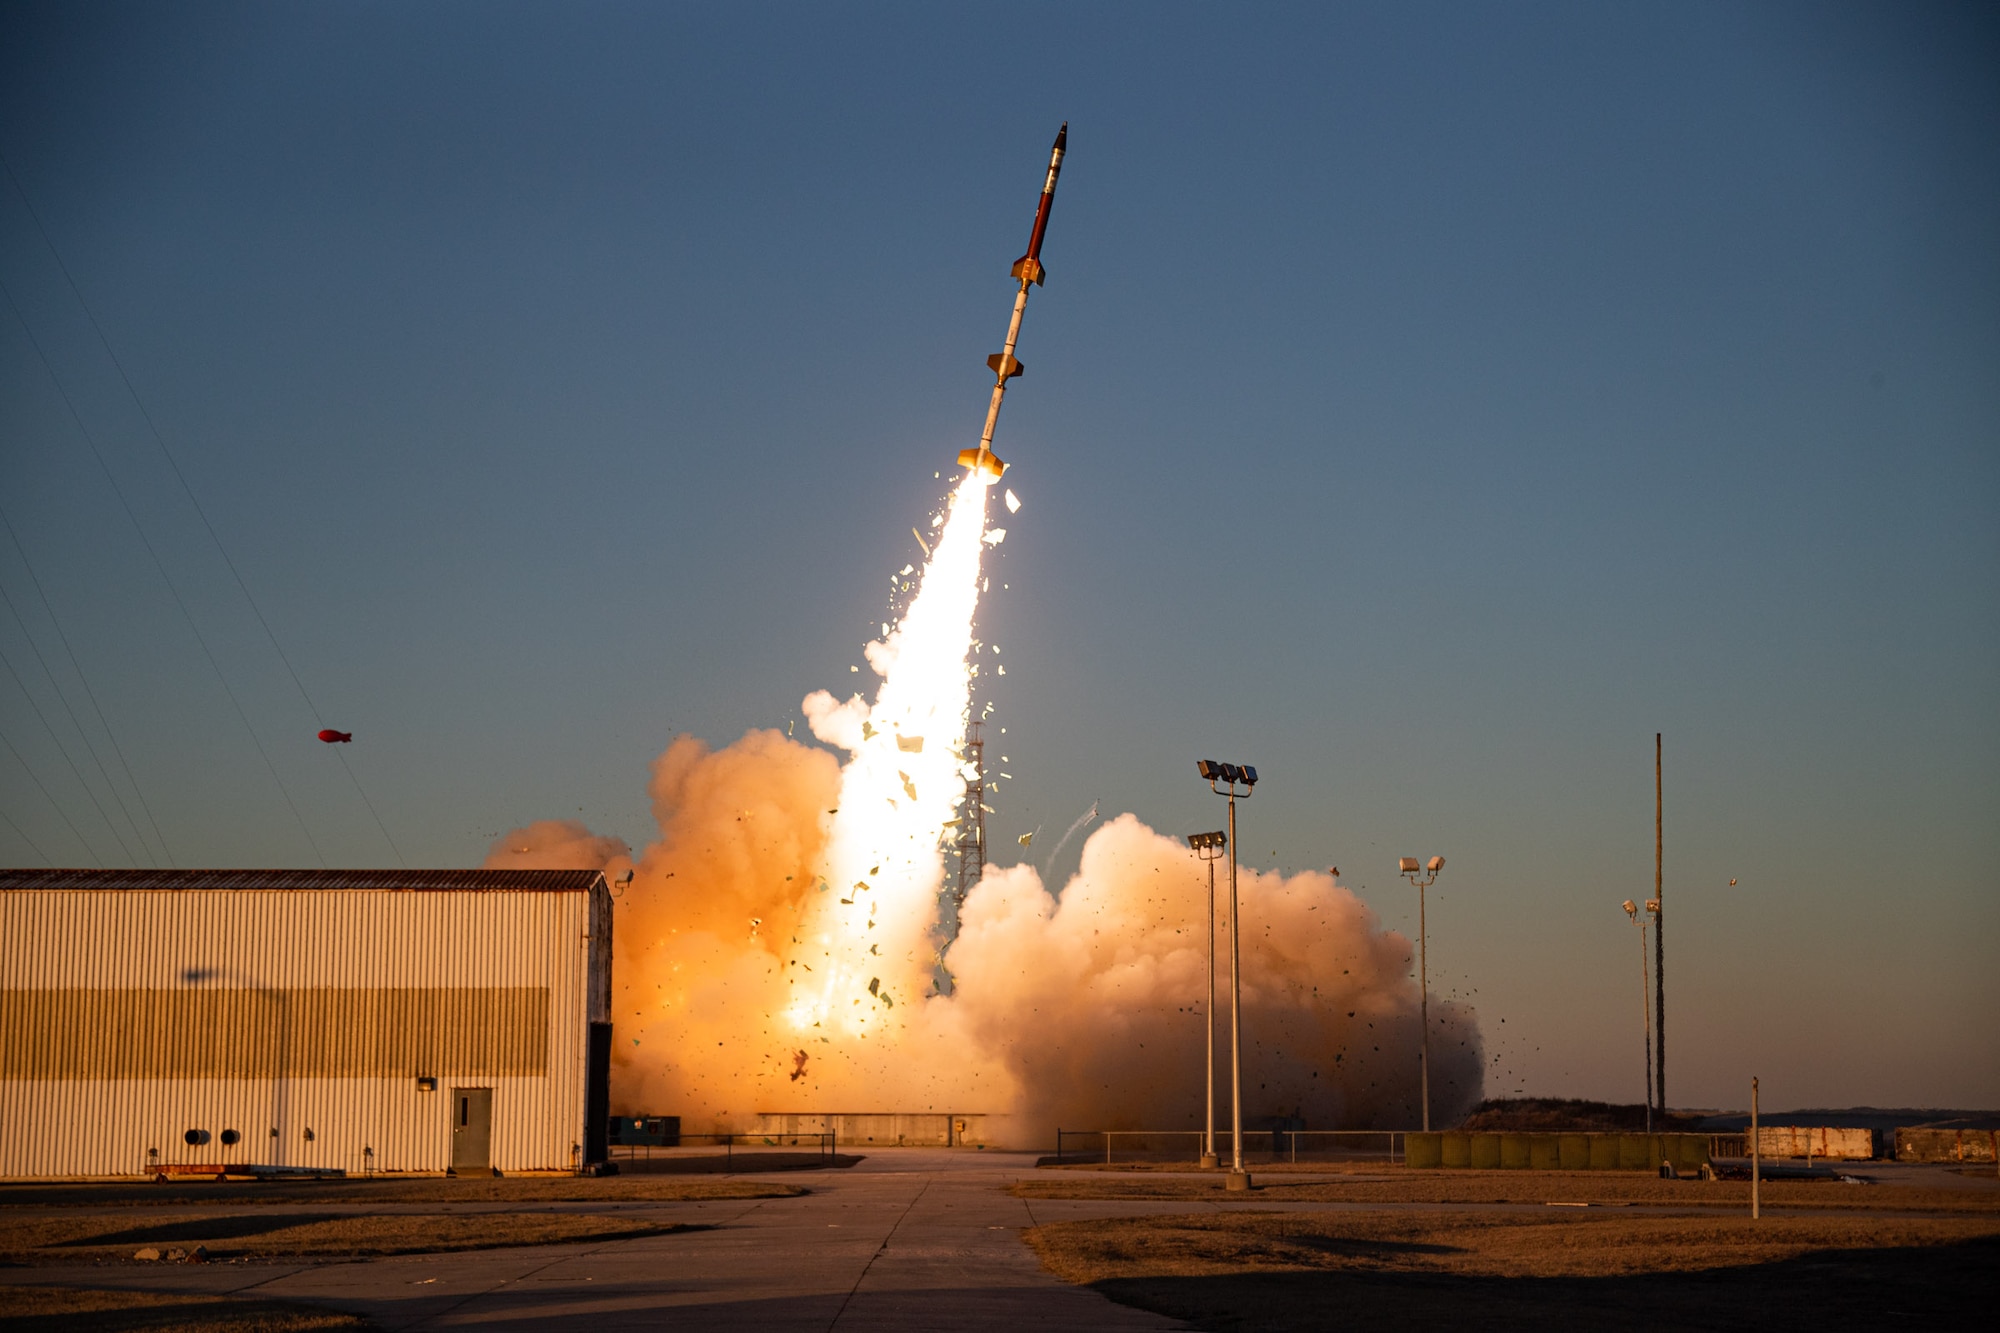 A Terrier-Terrier-Oriole sounding rocket, carrying an experimental research payload for the Air Force Research Laboratory, launches from NASA’s Wallops Flight Facility on Wallops Island, Va., March 3, 2021. The TTO sounding rocket vehicle will place the AFRL research payload onto a preplanned suborbital trajectory. This AFRL research experiment is the first AFRL and Space and Missile Systems Center's Launch Enterprise partnered experimental launch from Wallops Flight Facility, while also being the first U.S. Space Force's first sounding rocket launch with Space Vector Corporation. (Courtesy photo)